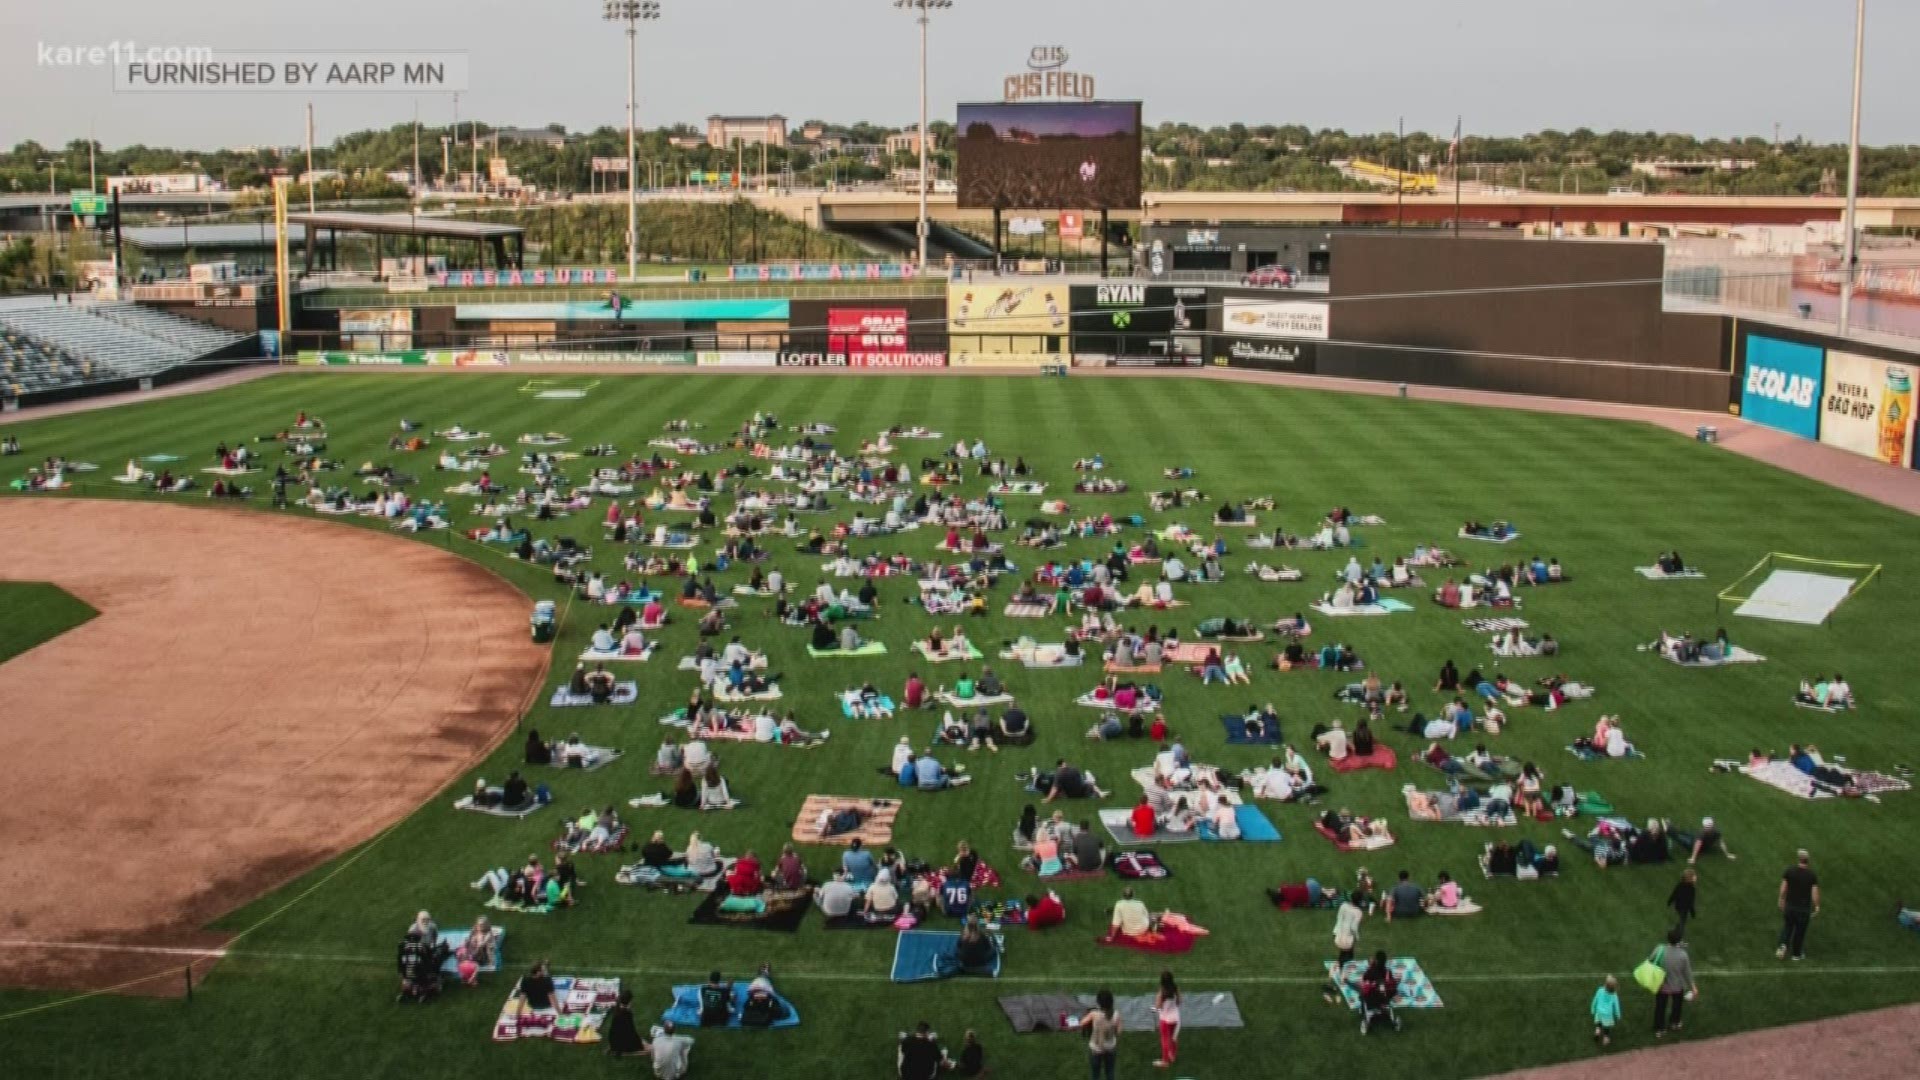 AARP Minnesota will host the 5th annual Movie Night Thursday, Aug. 1 at CHS Field in St. Paul.